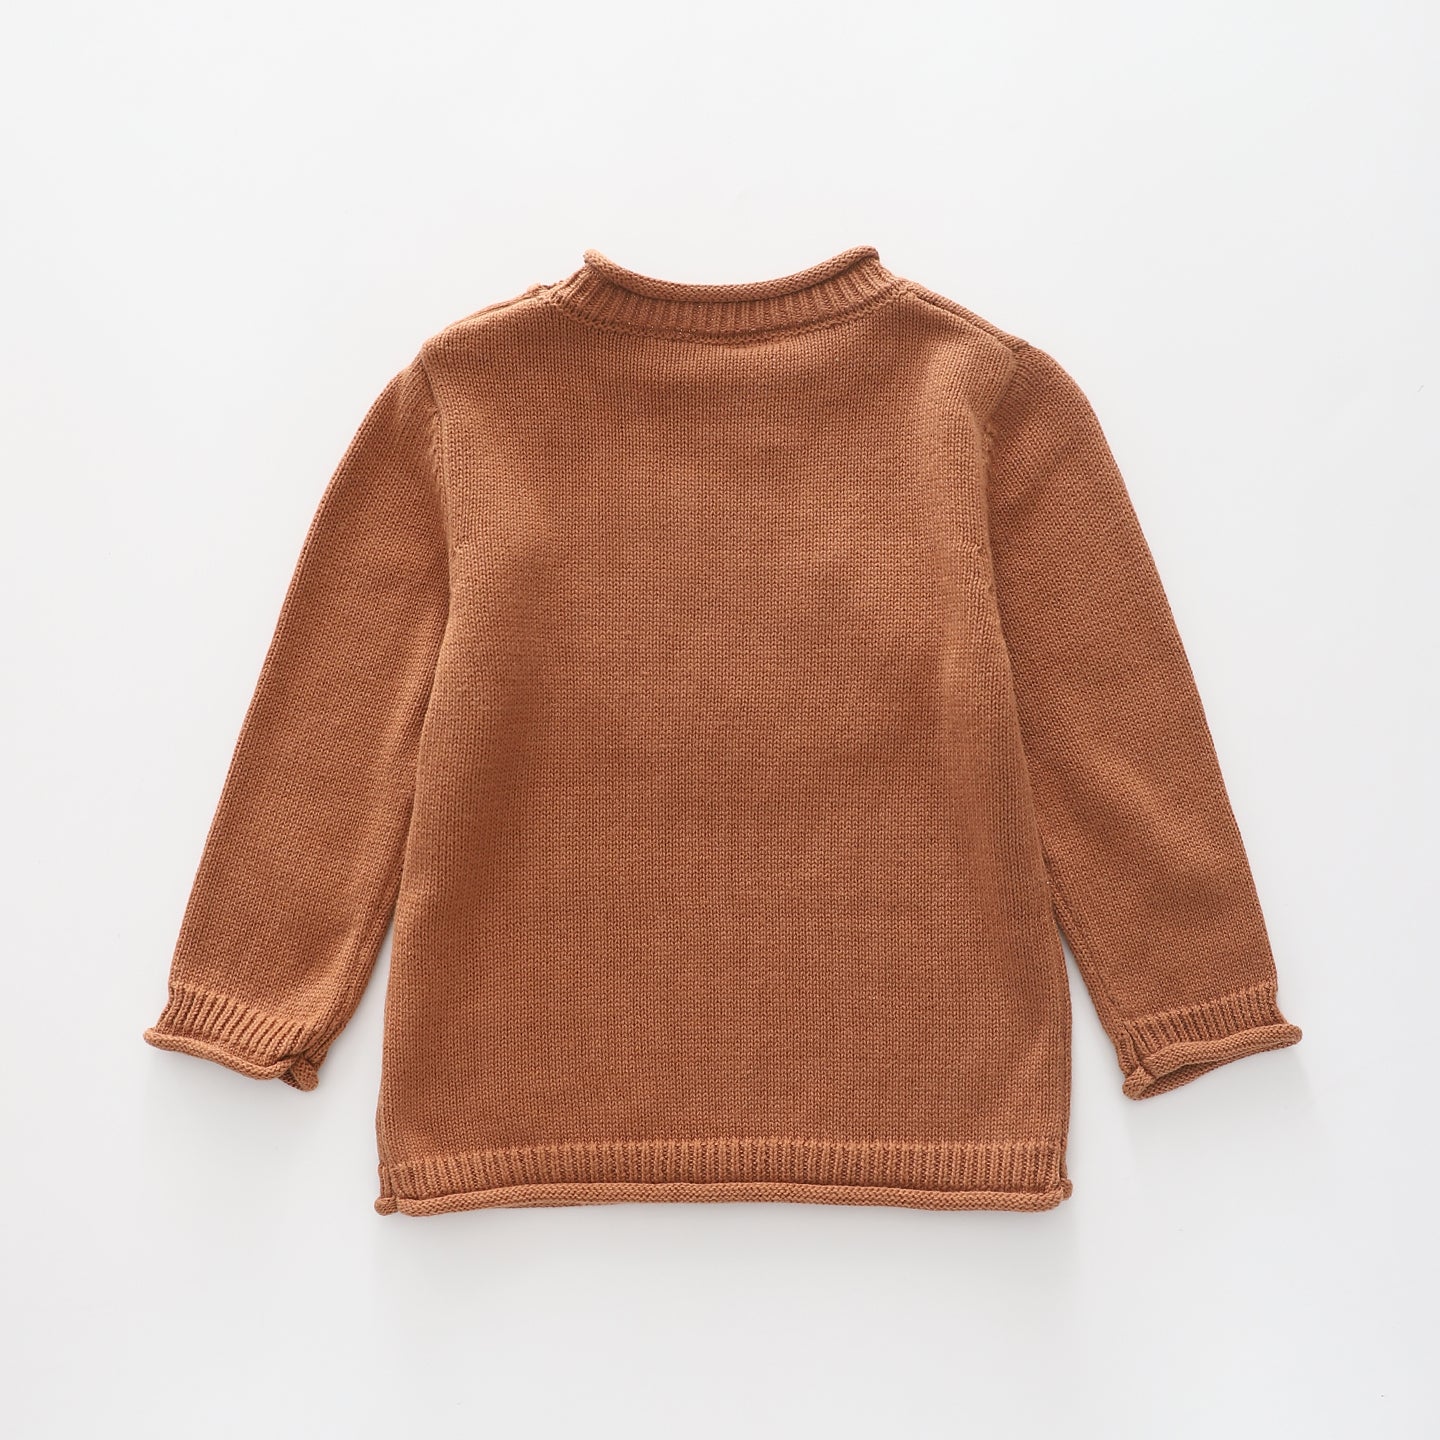 Beary Loveable, Baby Boys Knit Jumper